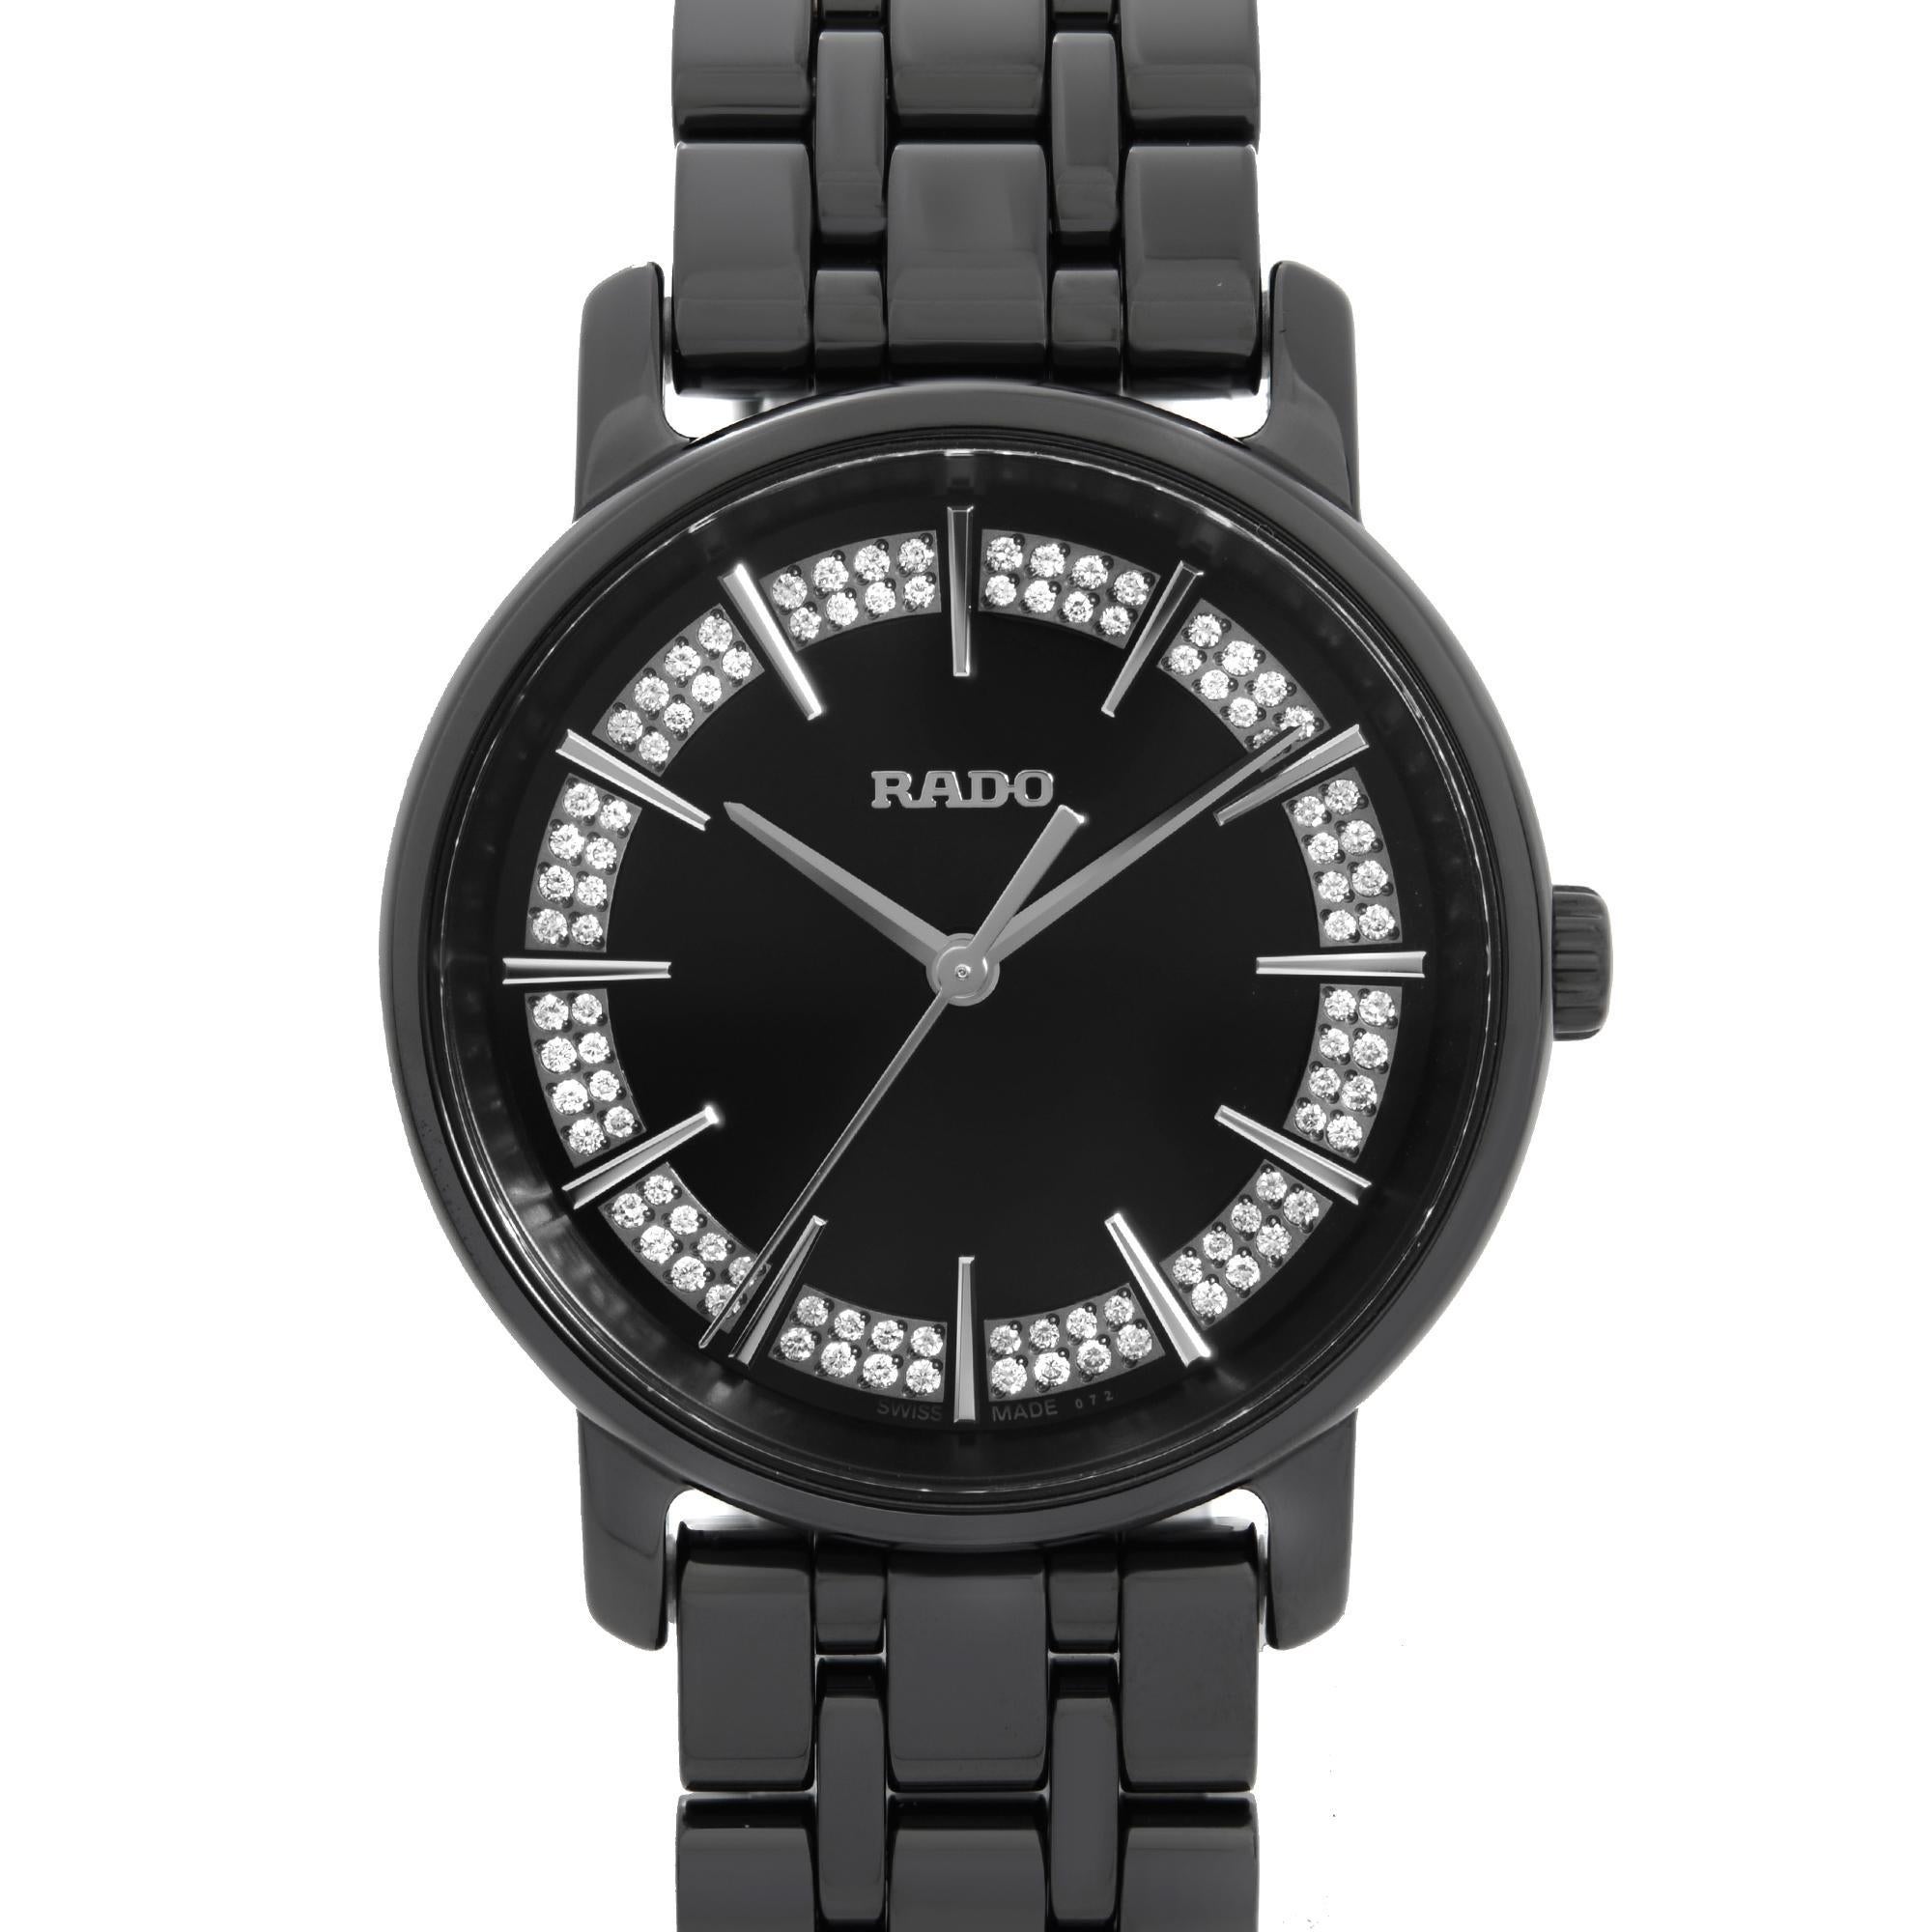 Unworn Rado Diamaster Quartz Watch R14063727. This Ladies Timepiece is Powered by a Quartz (Battery) Movement and Features: High-Tech Black Ceramic Case and Bracelet, Fixed Black Ceramic Bezel, Black Dial with Silver-Tone Hands And Index Hour